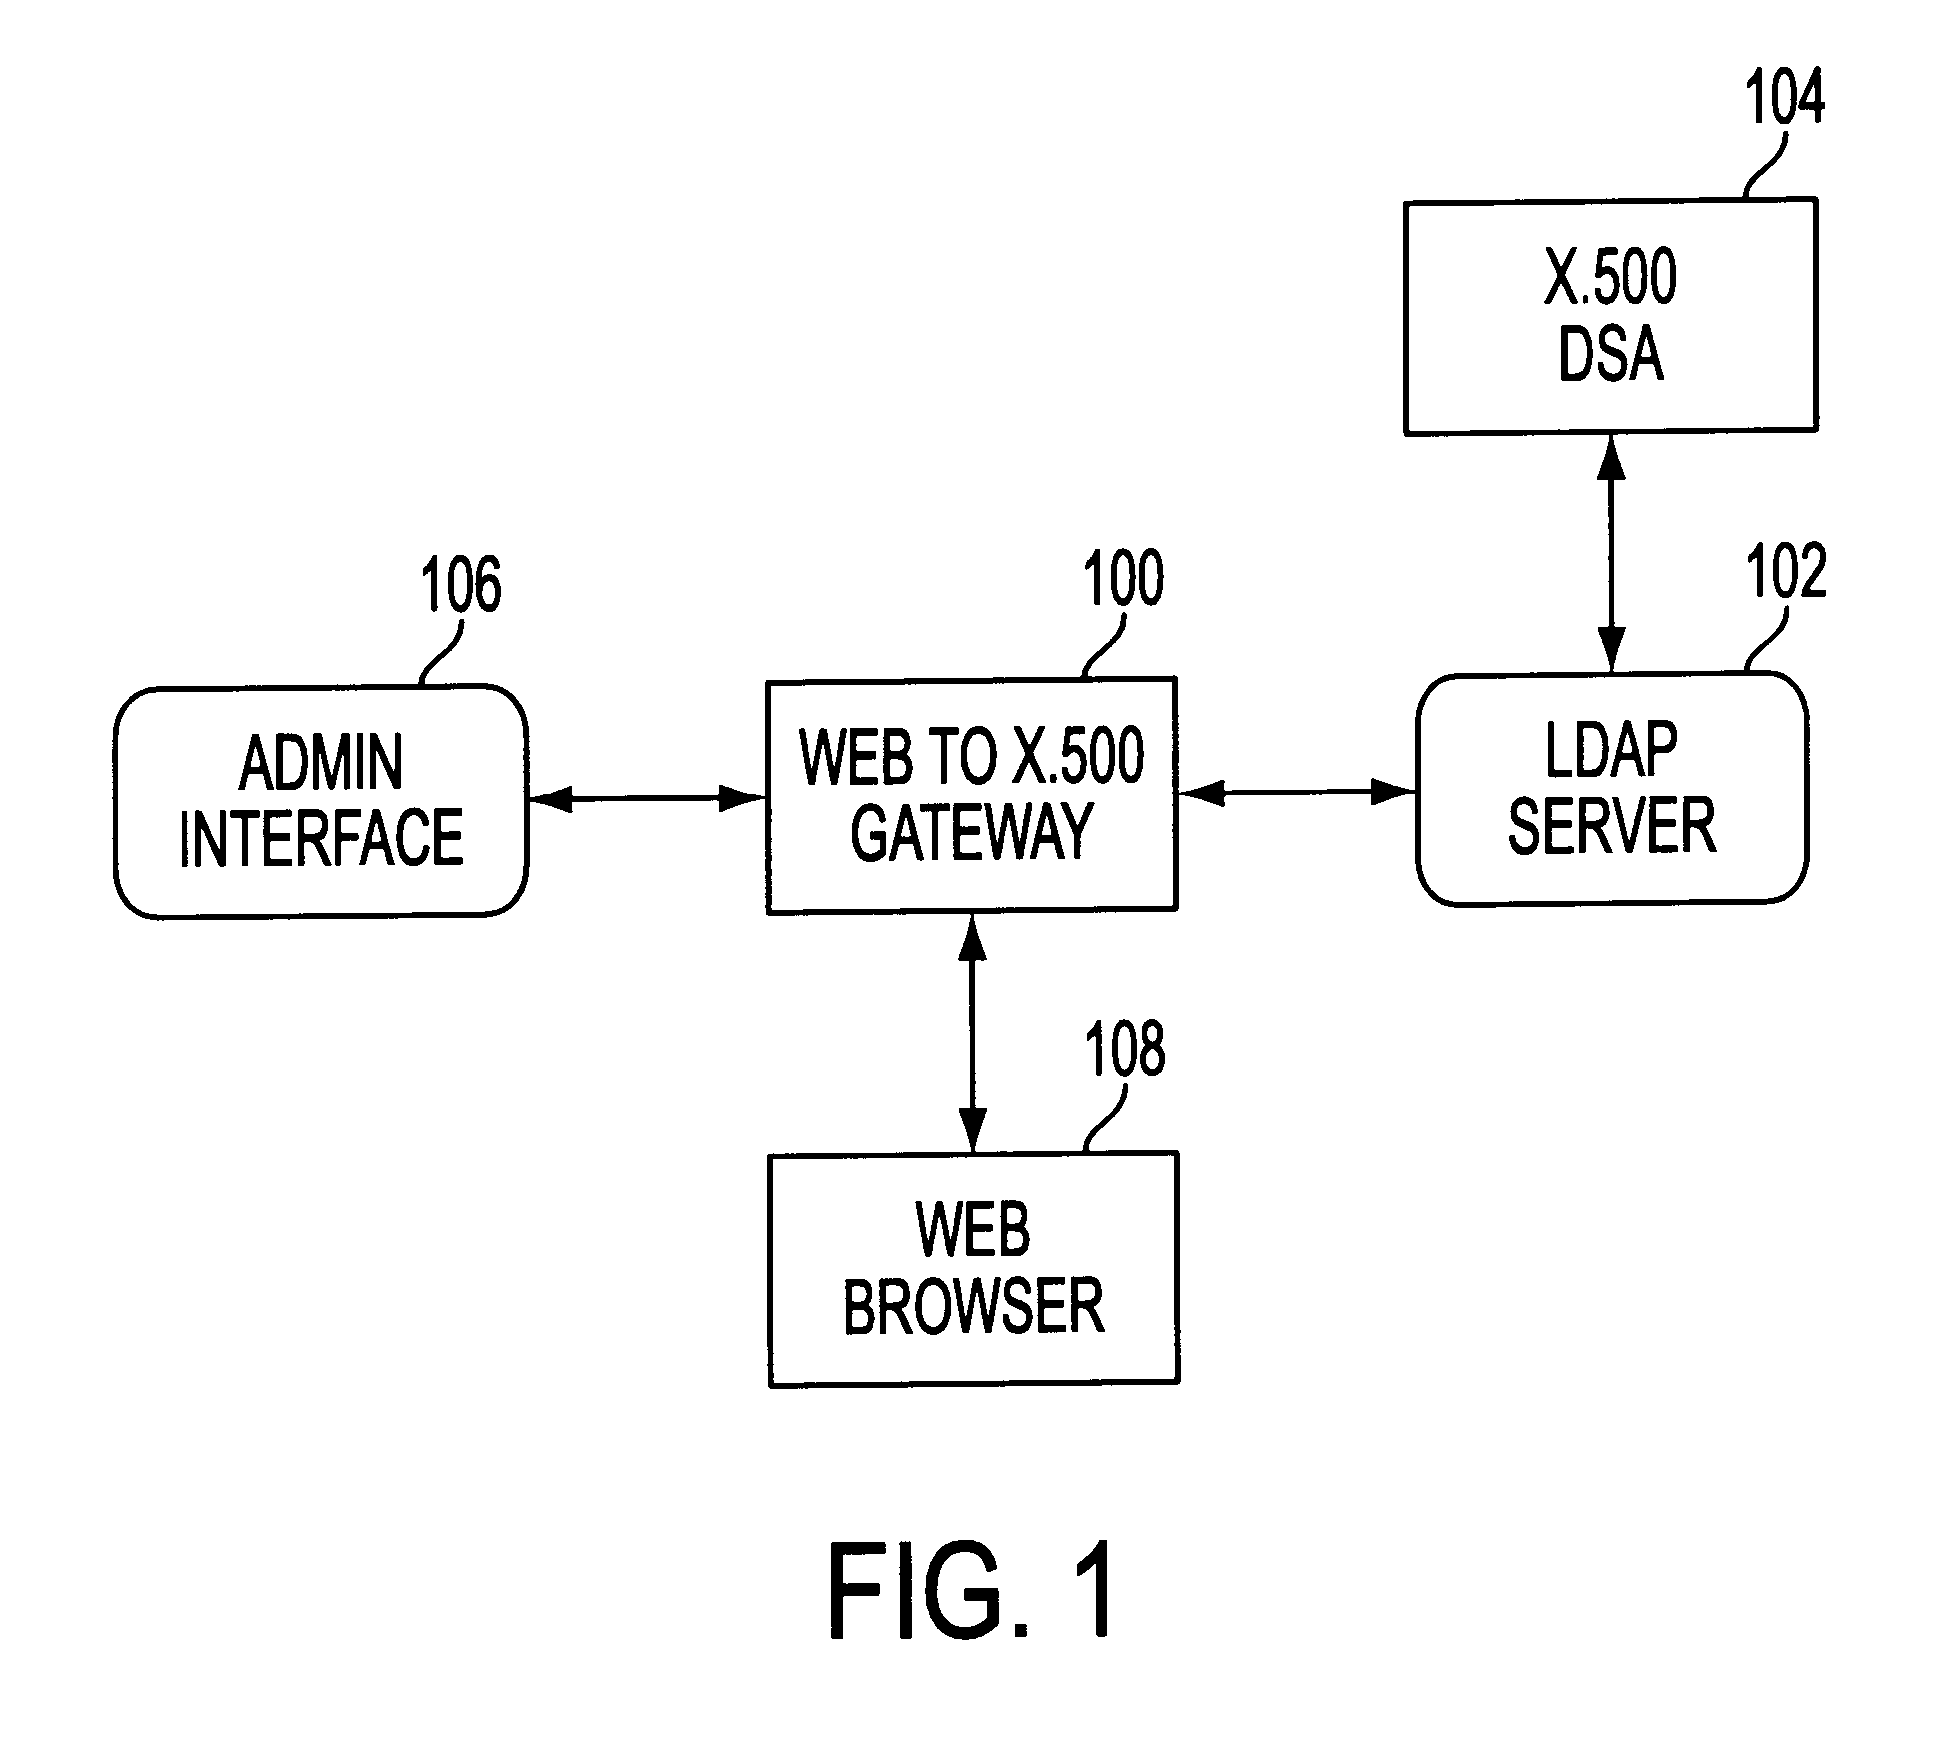 Web interface and method for displaying directory information